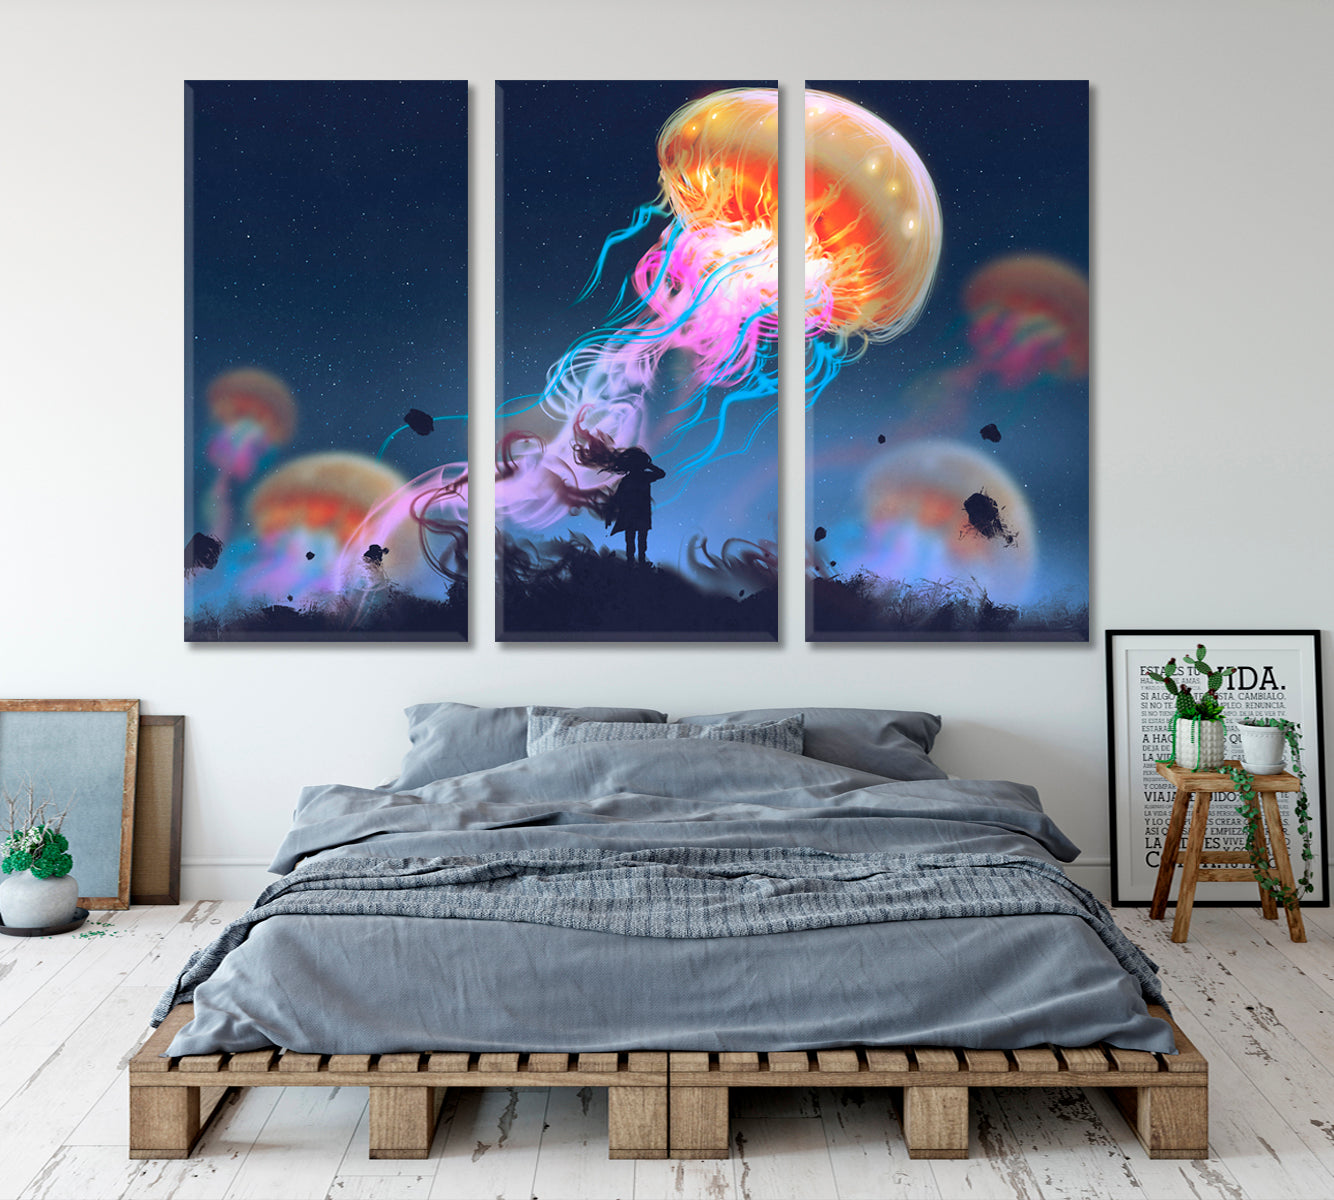 Giant Jellyfish Floating in Sky And Girl Surreal Painting Surreal Fantasy Large Art Print Décor Artesty 3 panels 36" x 24" 